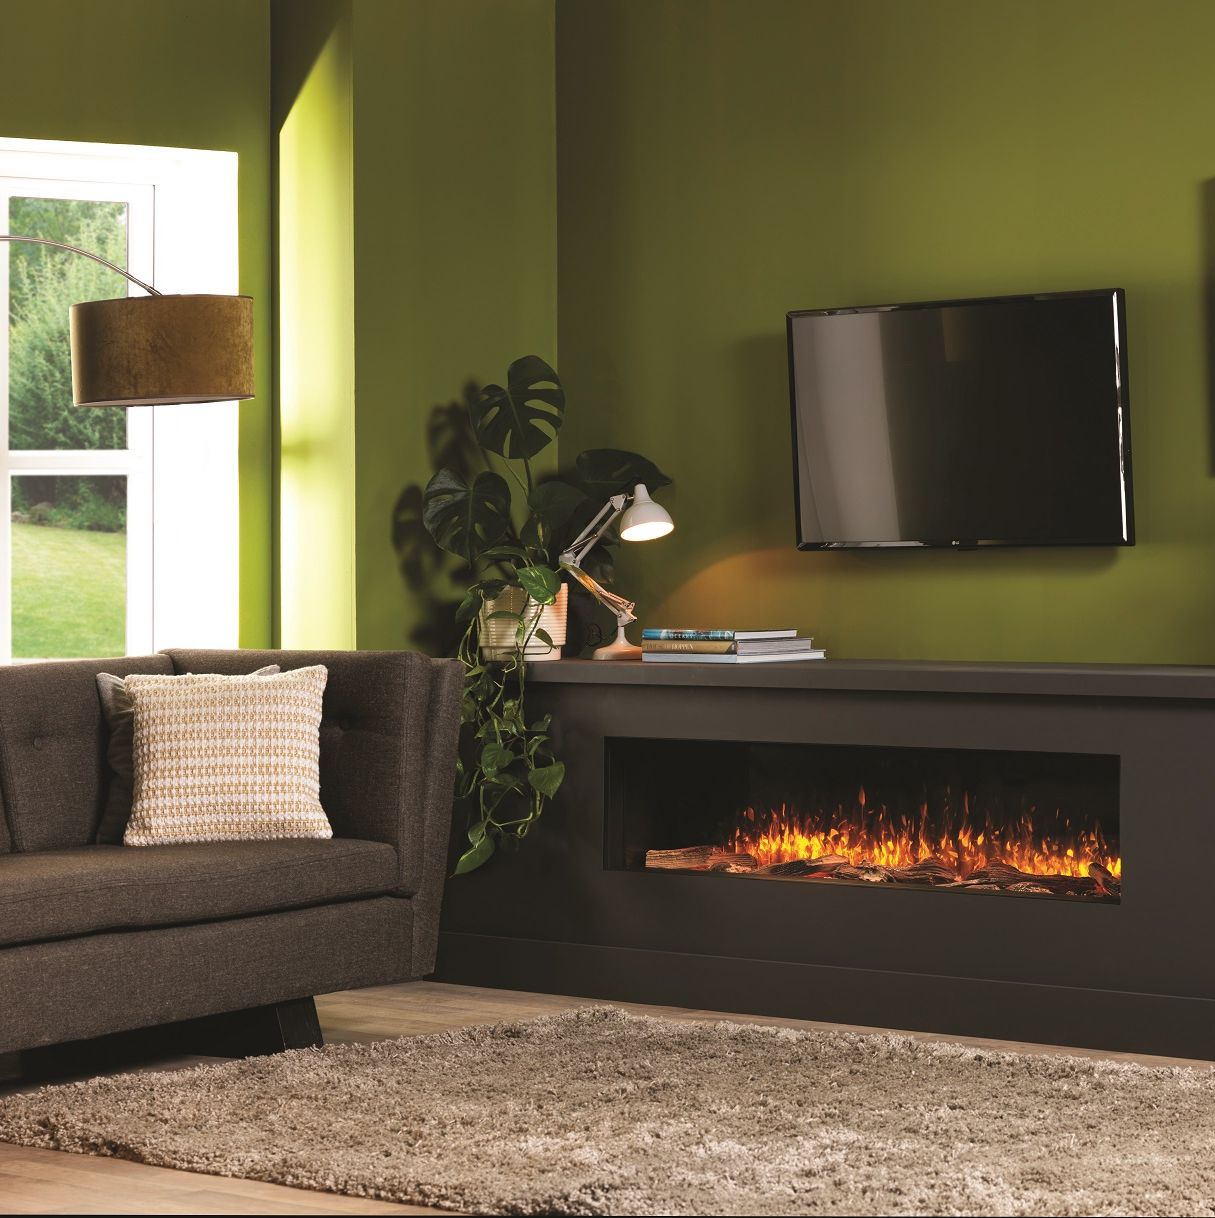 Choosing the right fireplace